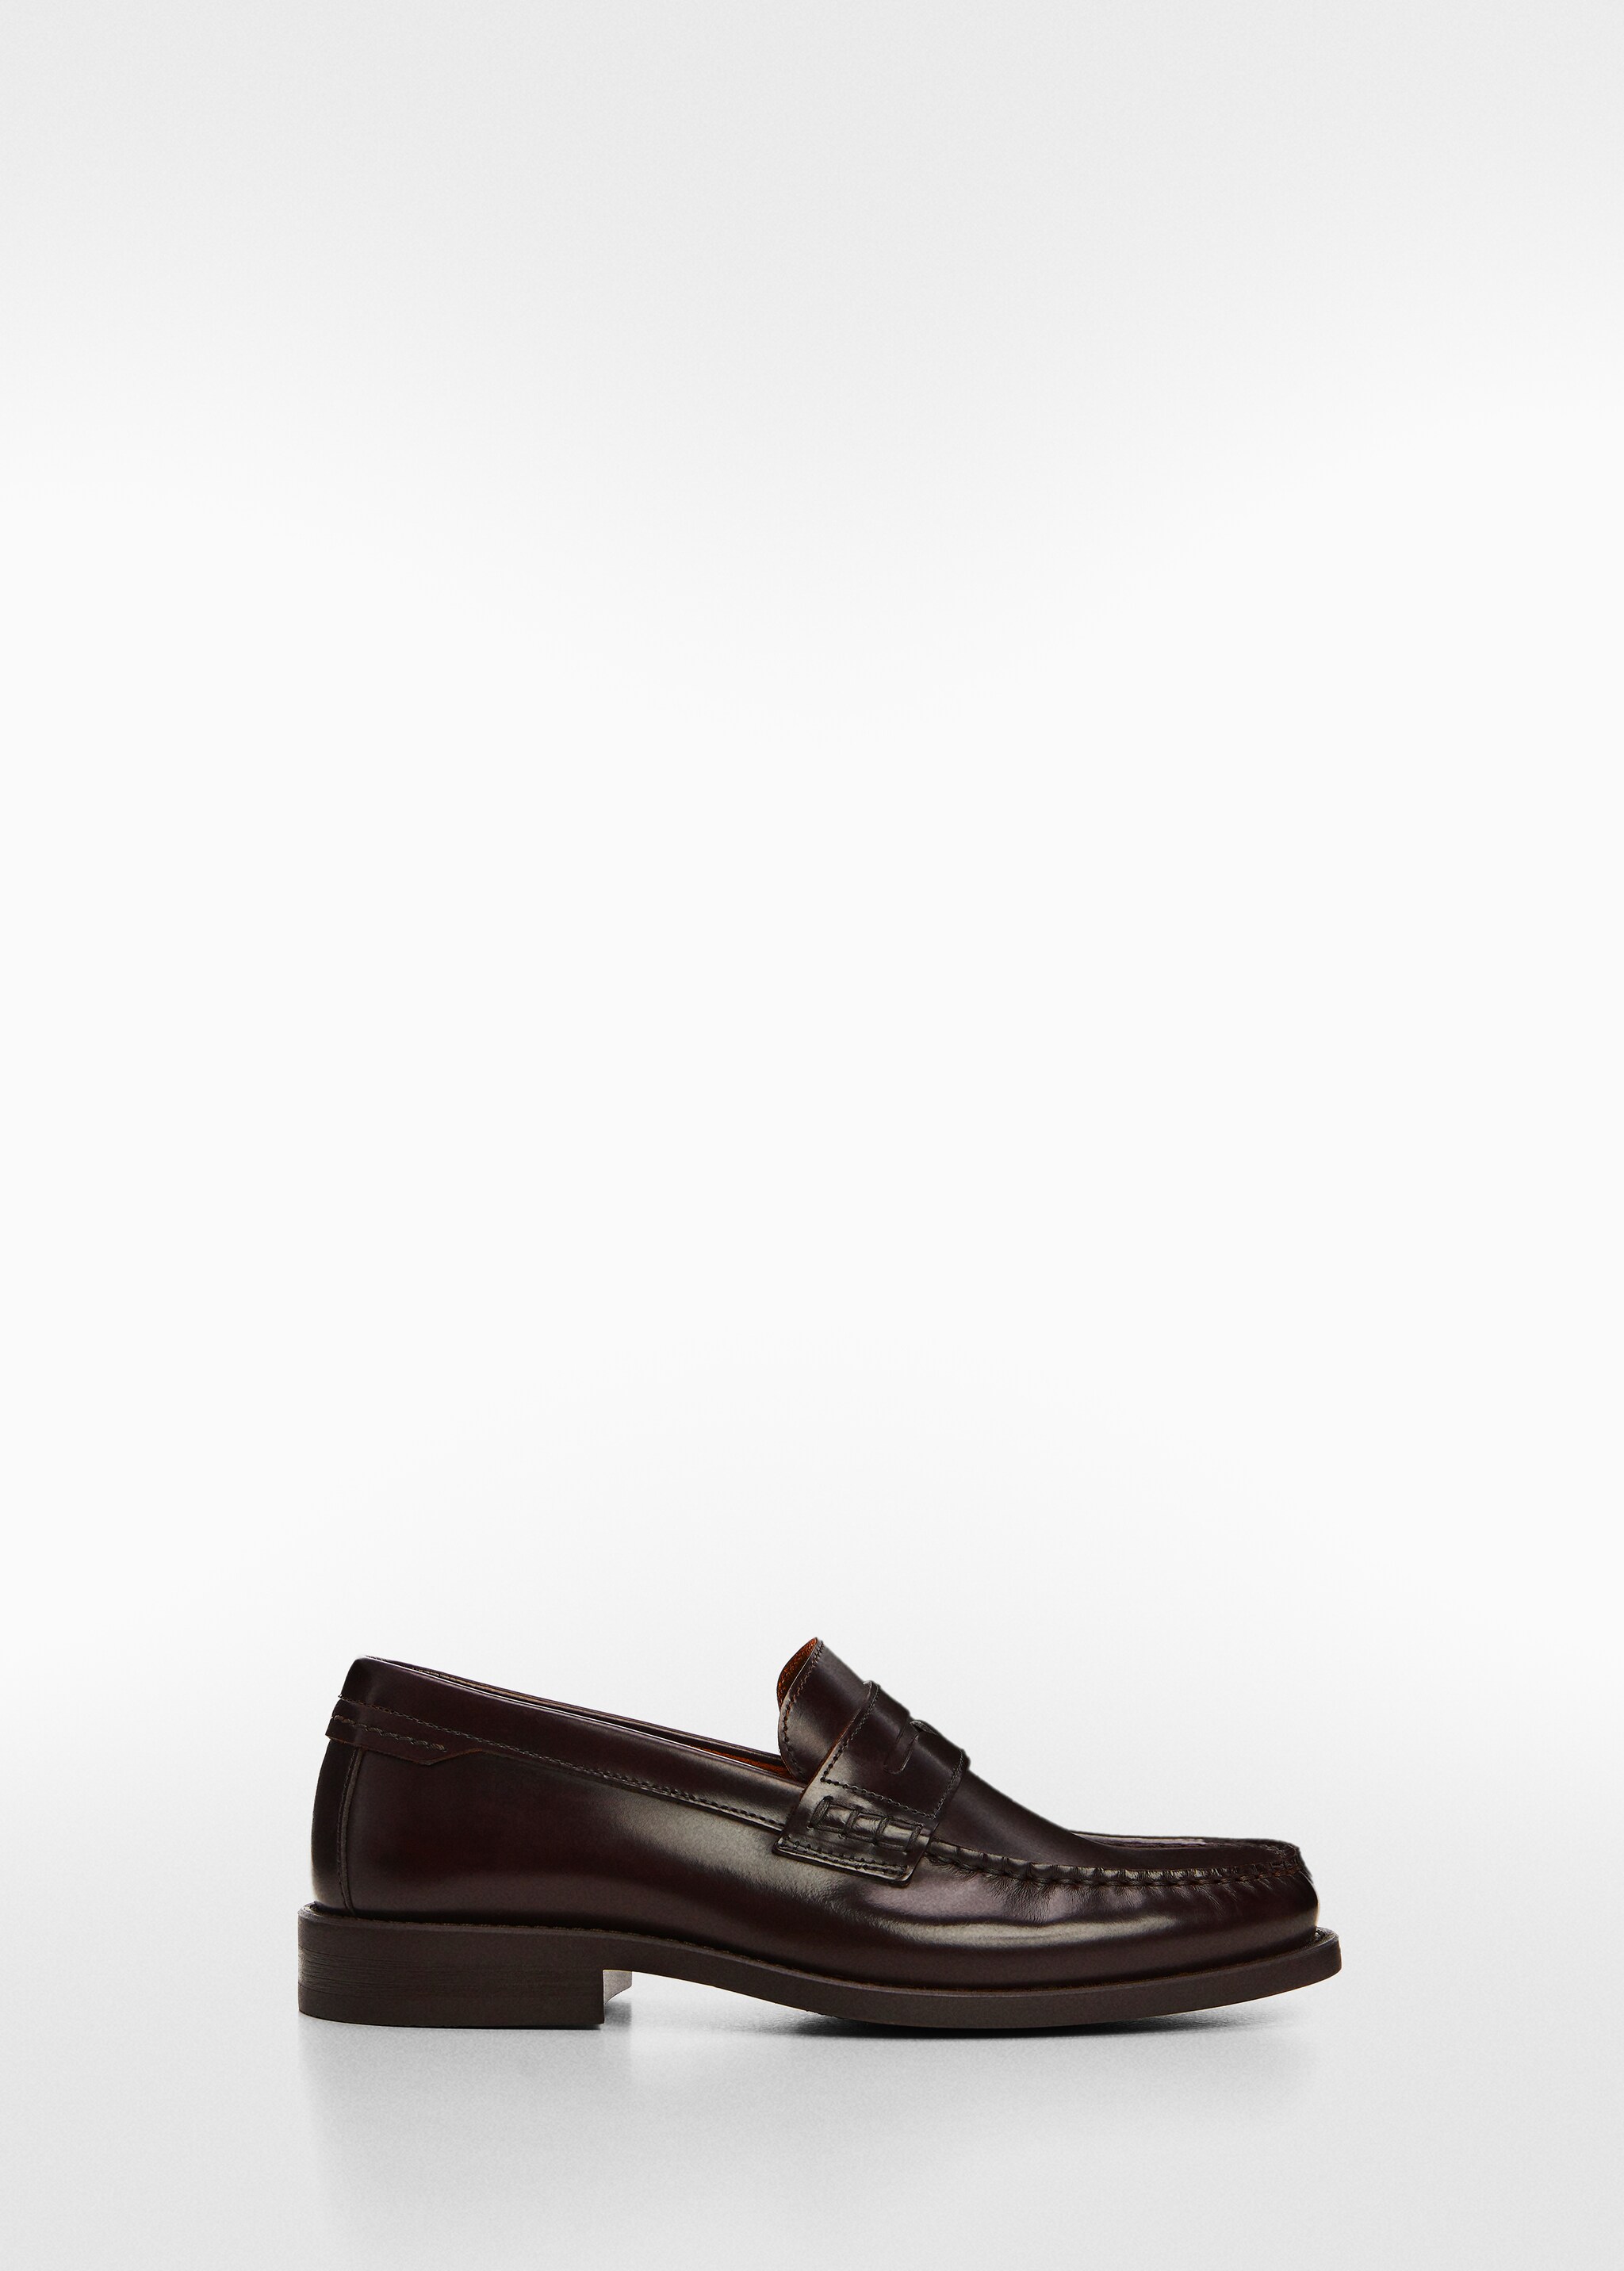 Leather penny loafers - Article without model